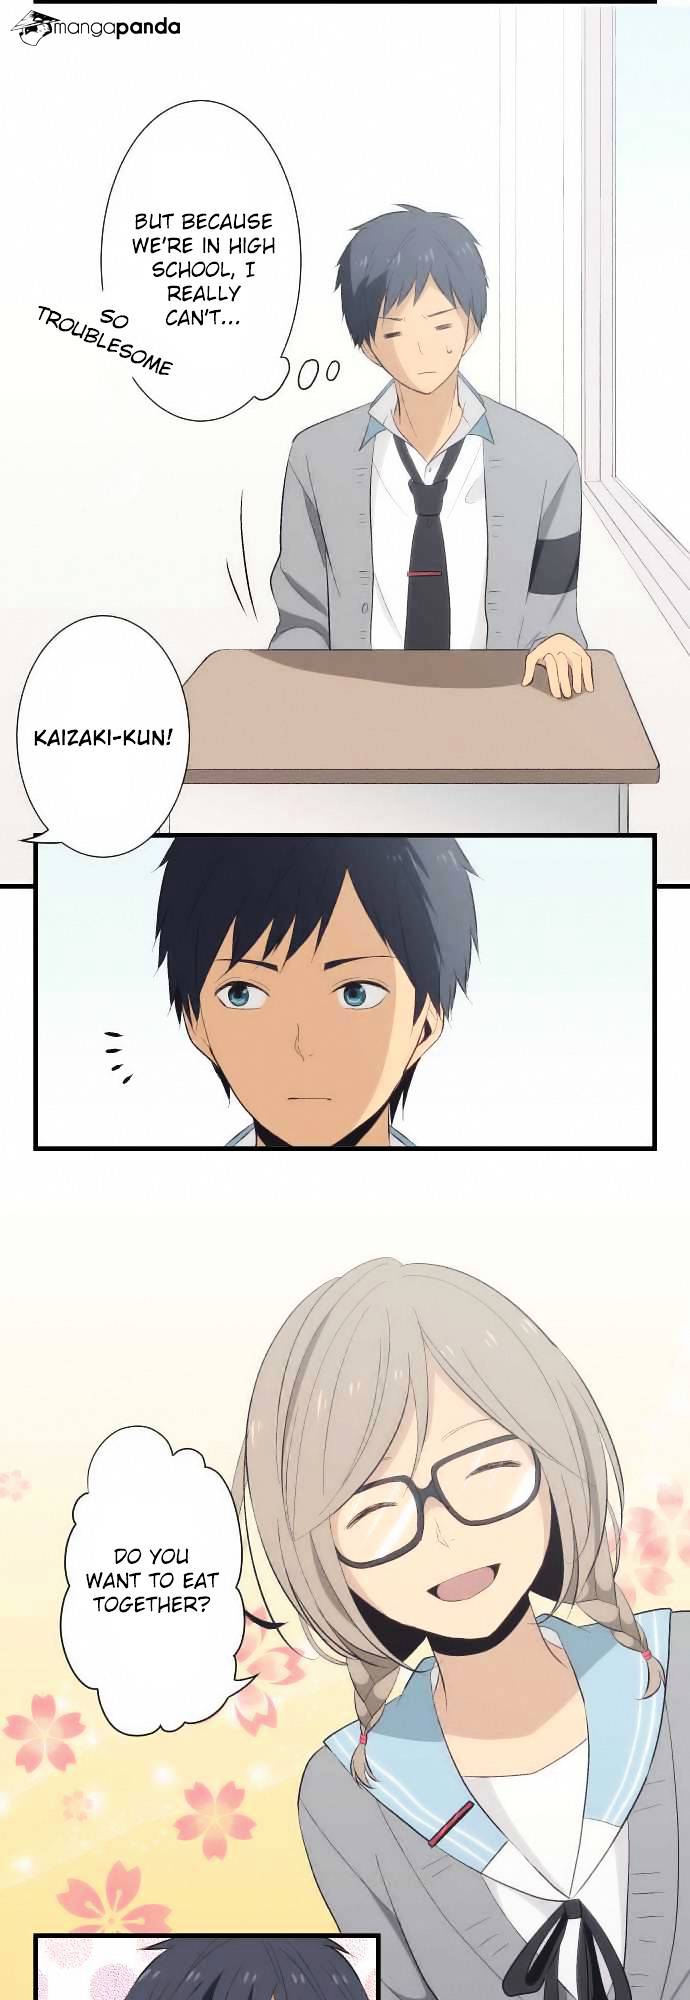 Relife - Page 2